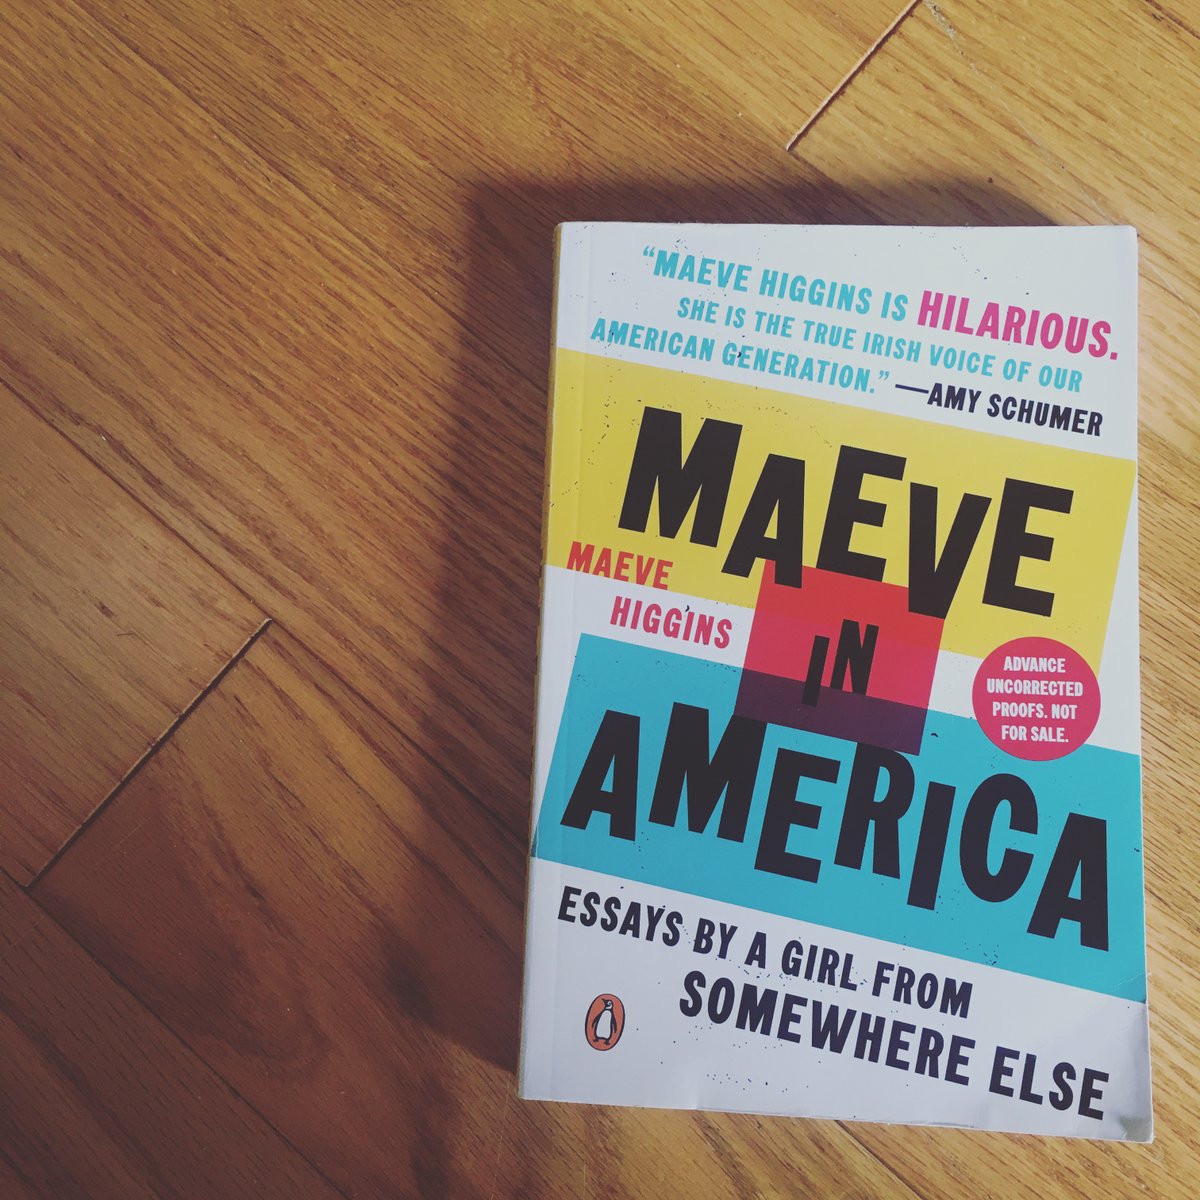 here is MAEVE IN AMERICA by  @maevehiggins, born in Ireland, now a resident of New York. comedian Maeve is hilarious, insightful, and America is better because she is here.  #supportimmigrants  #supportimmigrantwriters